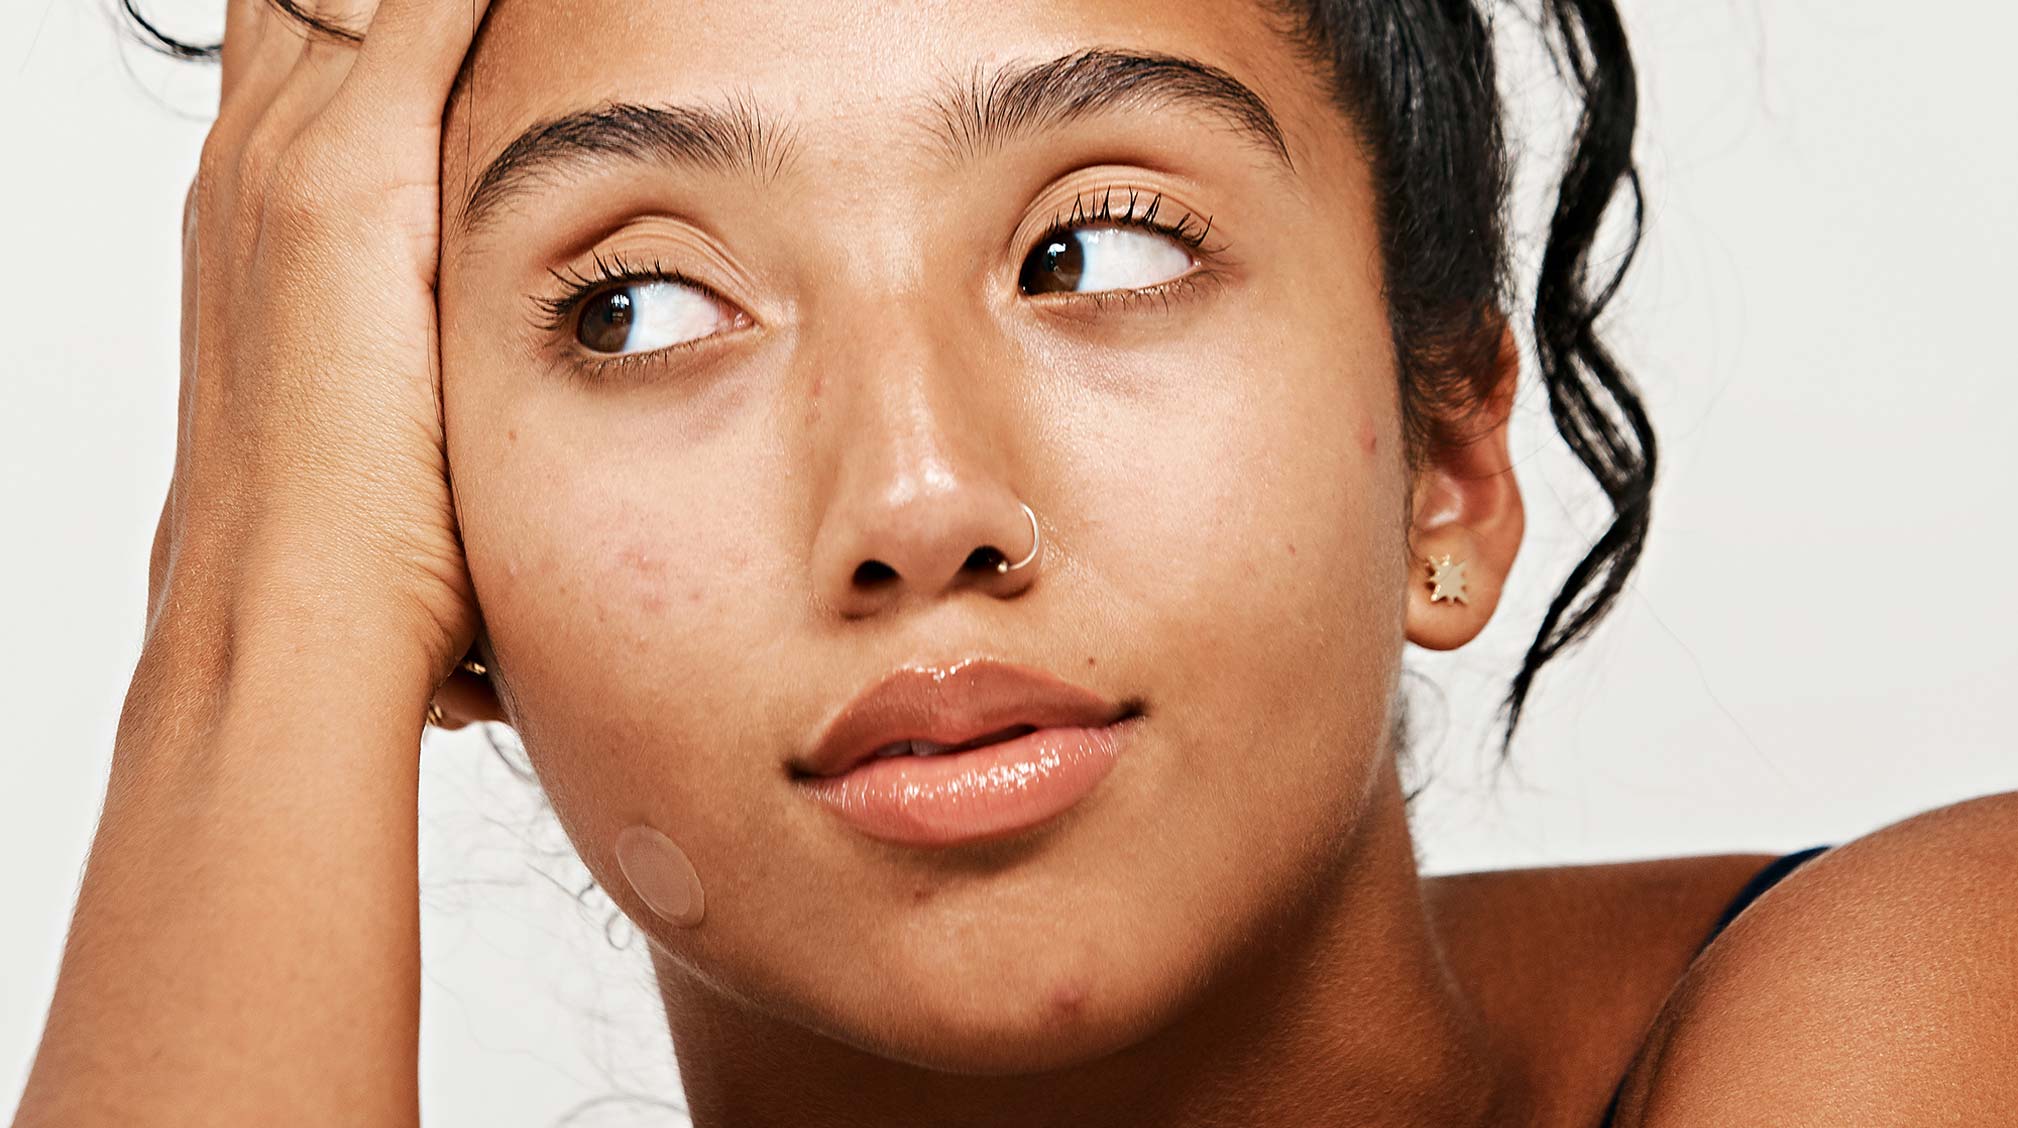 How to Get Rid of a Pimple Overnight